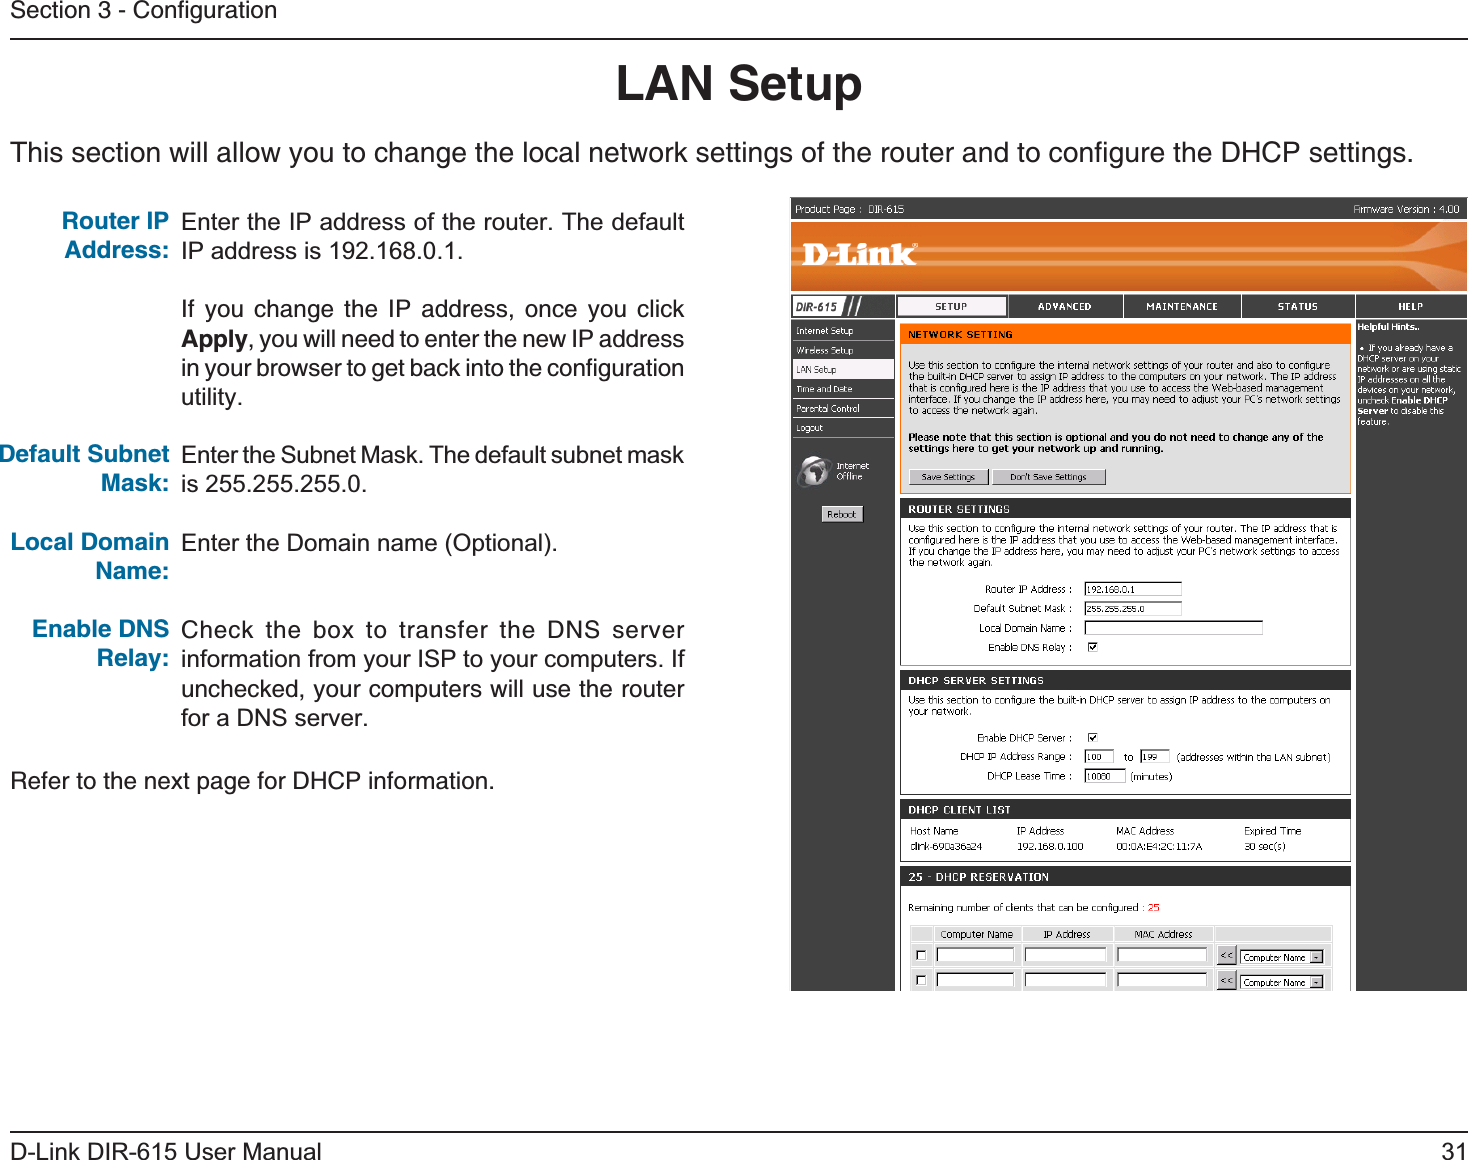 31D-Link DIR-615 User ManualSection 3 - ConﬁgurationThis section will allow you to change the local network settings of the router and to conﬁgure the DHCP settings.LAN SetupEnter the IP address of the router. The default IP address is 192.168.0.1.If you change the IP address, once you click Apply, you will need to enter the new IP address in your browser to get back into the conﬁguration utility.Enter the Subnet Mask. The default subnet mask is 255.255.255.0.Enter the Domain name (Optional).Check the box to transfer the DNS server information from your ISP to your computers. If unchecked, your computers will use the router for a DNS server.Router IPAddress:Default Subnet Mask:Local Domain Name:Enable DNS Relay:Refer to the next page for DHCP information.